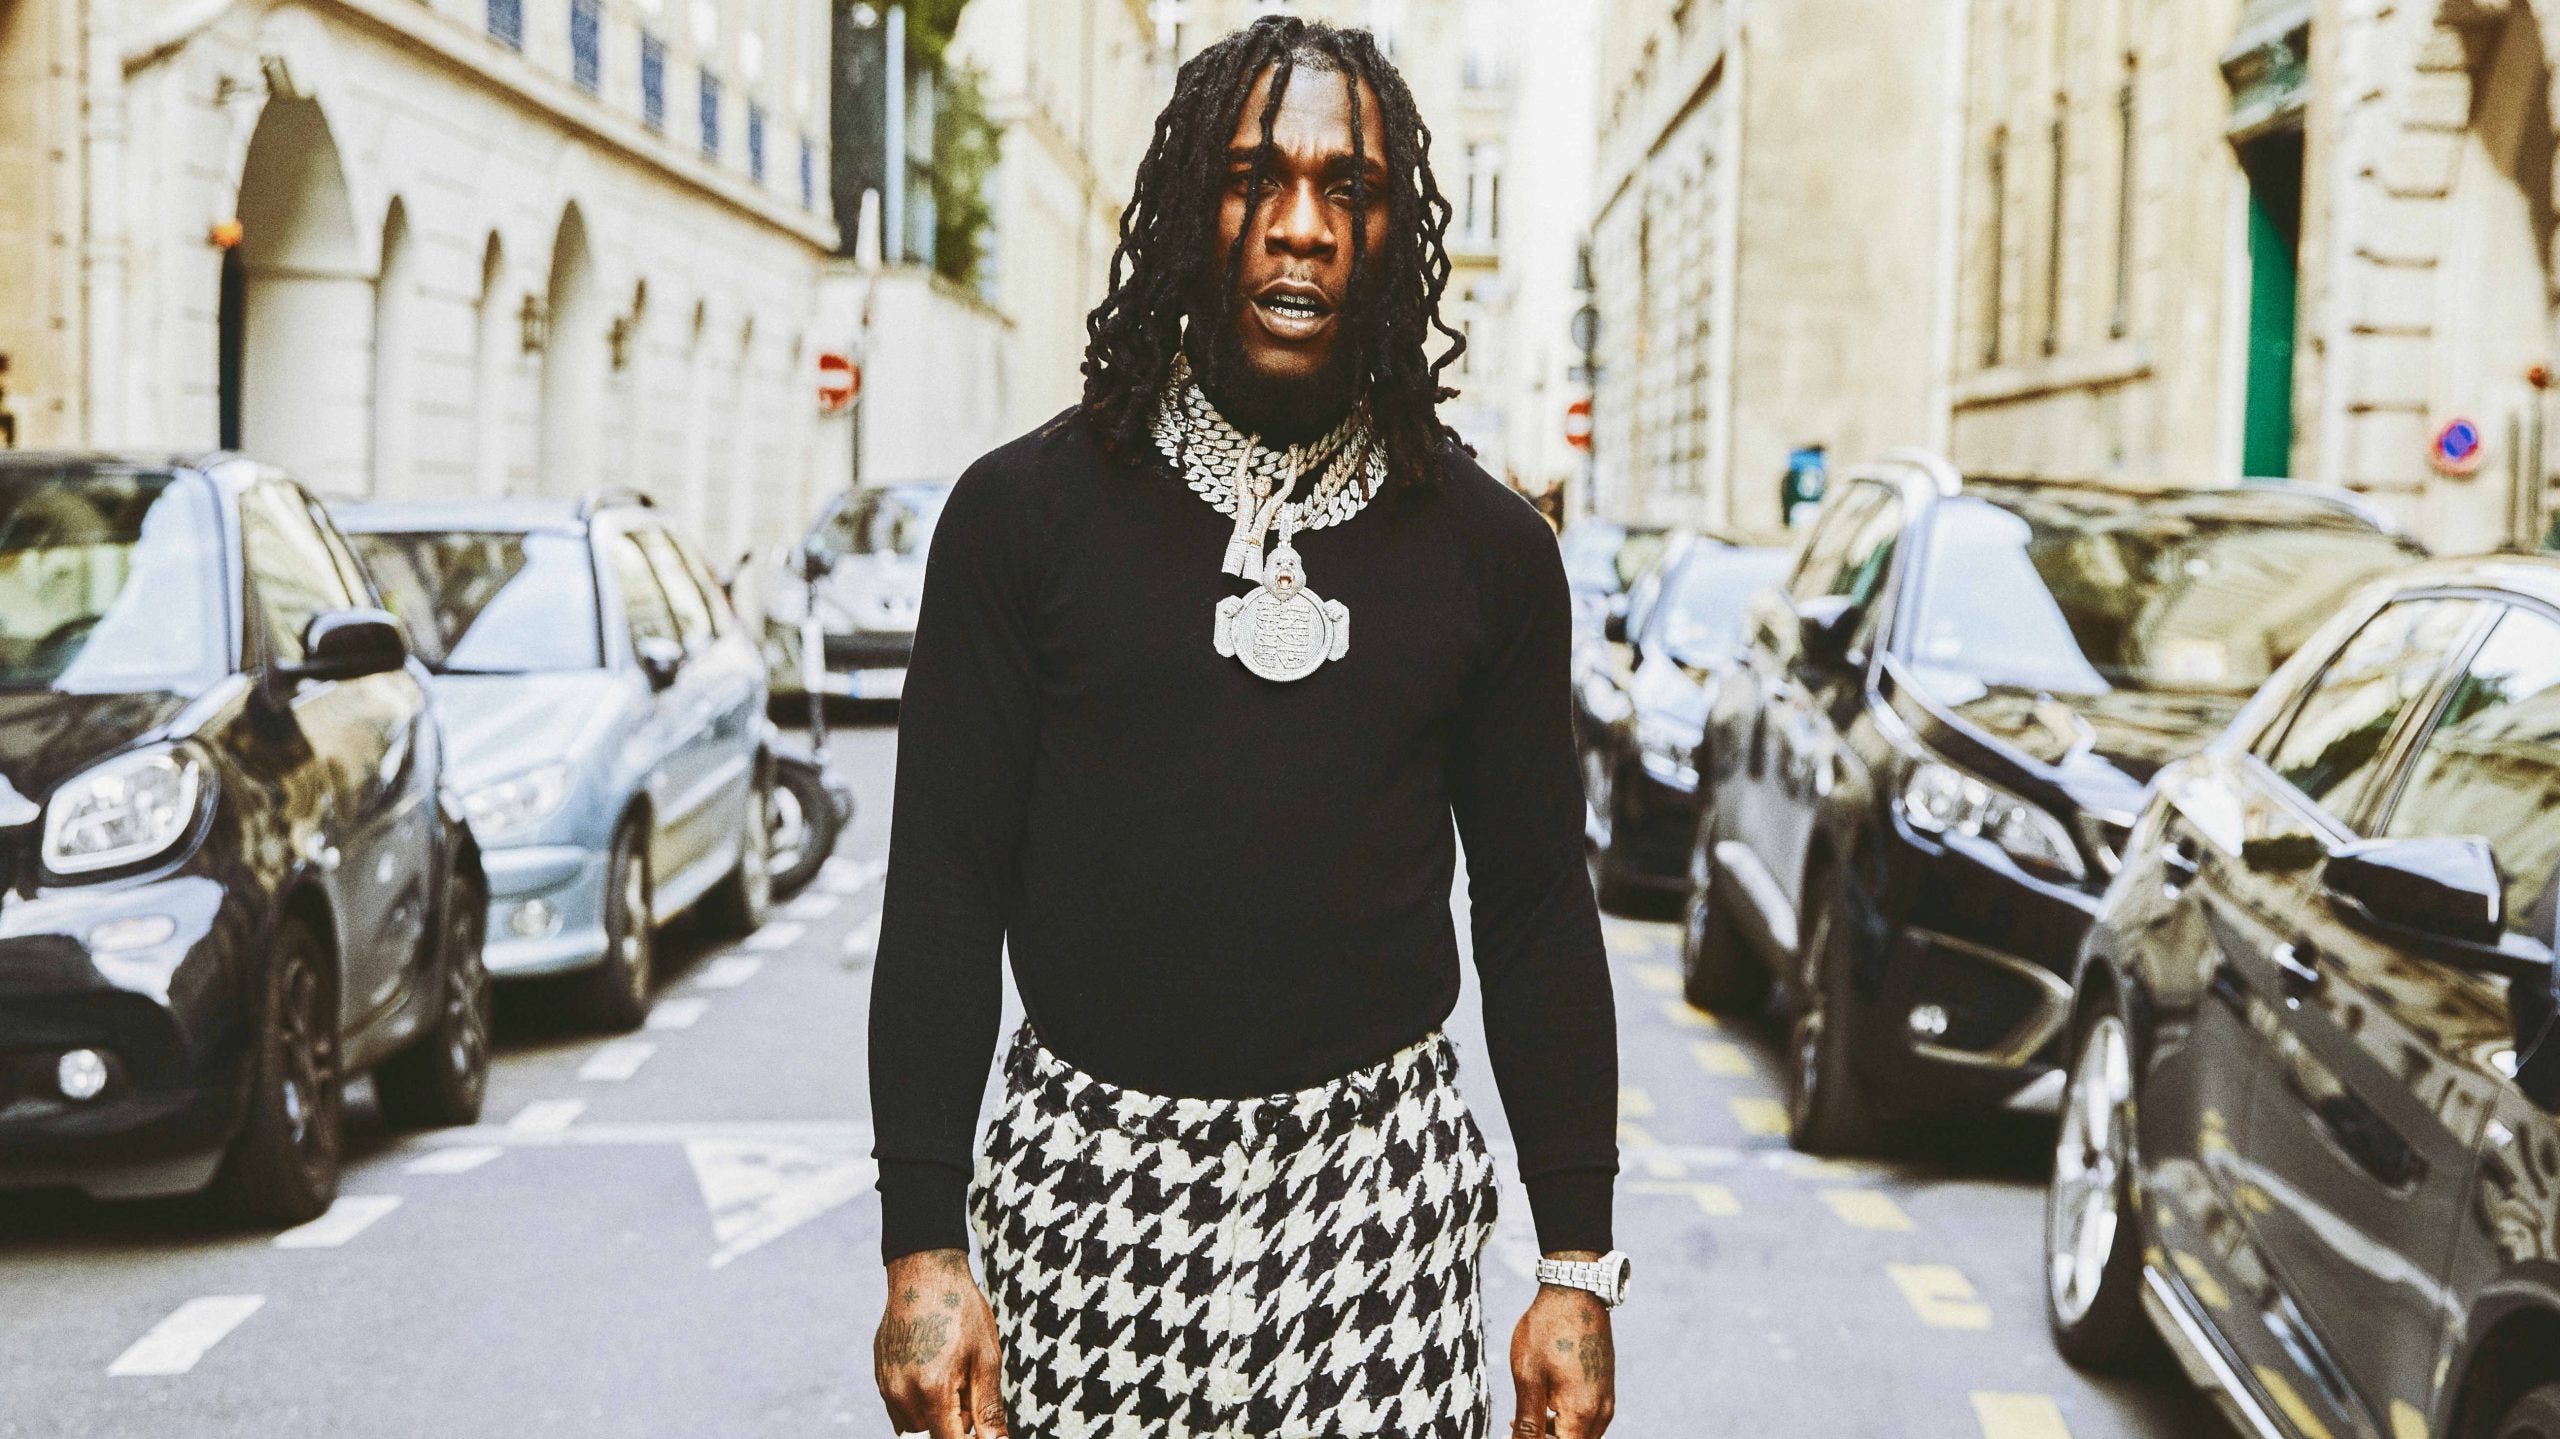 See Why This Burna Boy Performance Of ‘Collateral Damage’ Supports Women